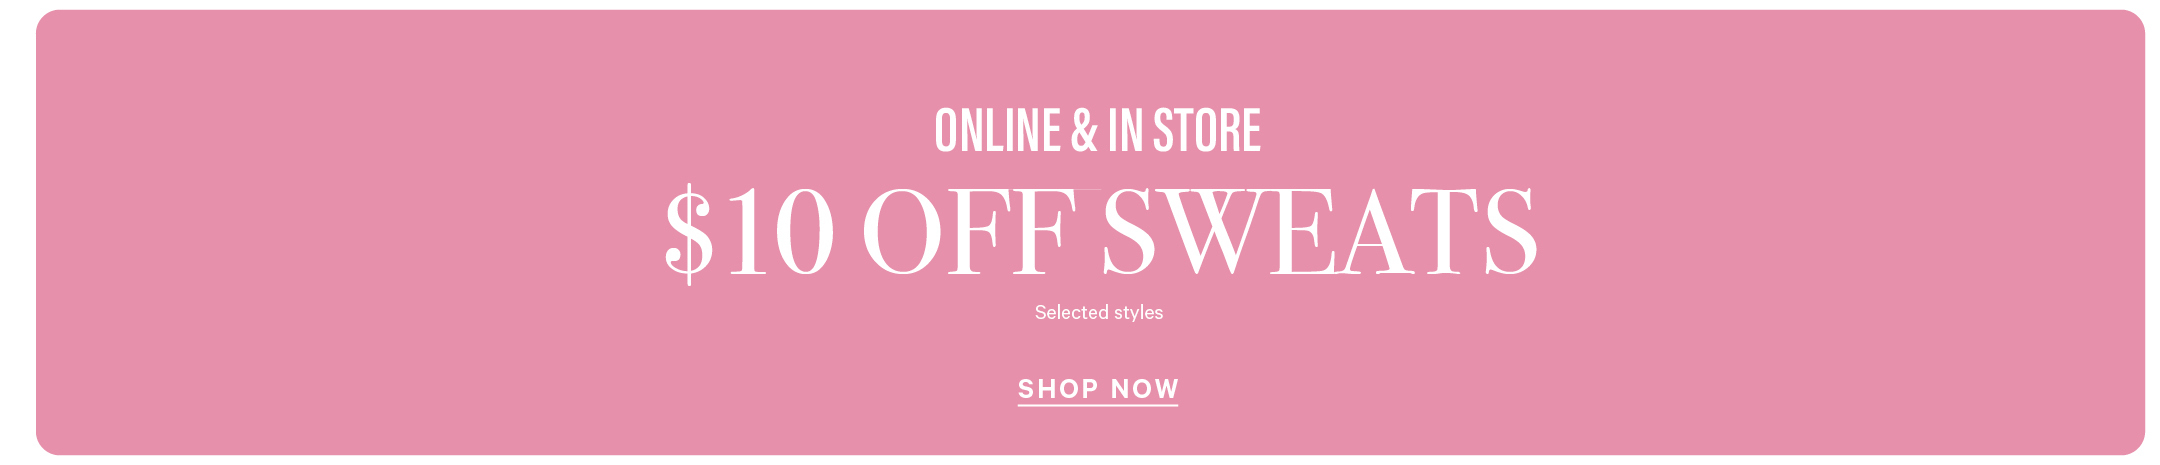 $10 Off Sweats. Online & In Store. Selected Styles 